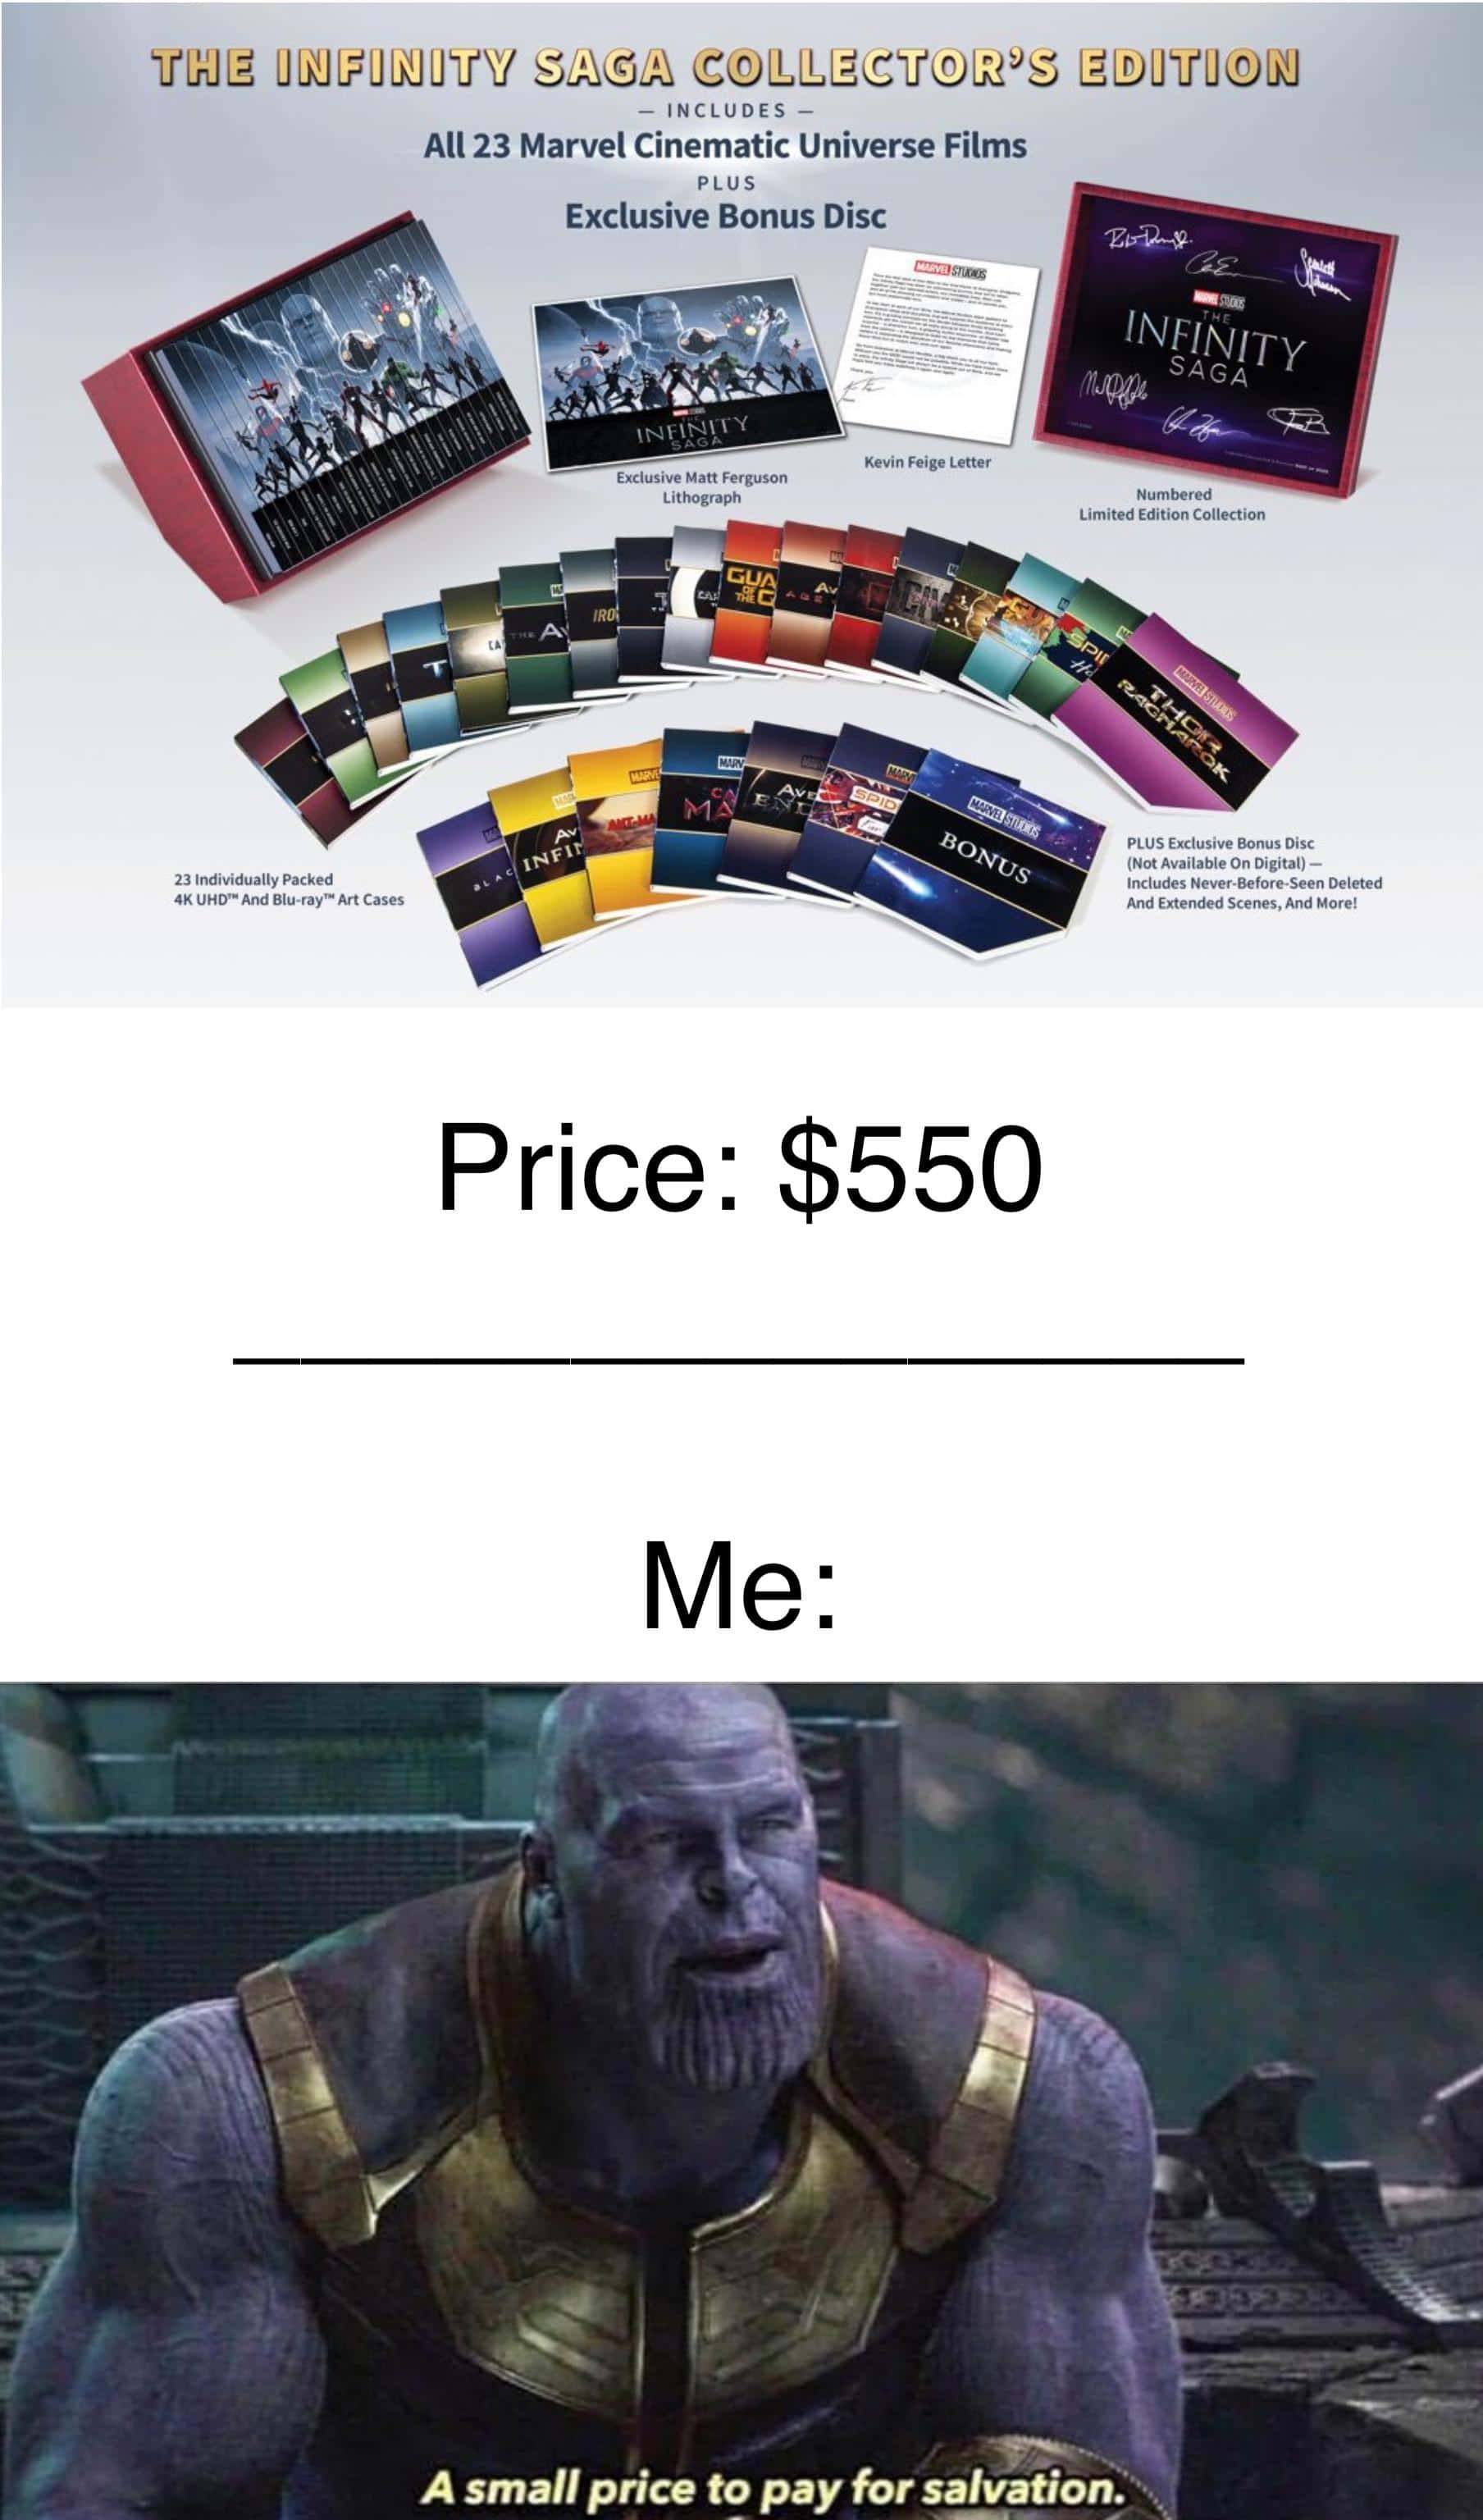 thanos avengers-memes thanos text: — INCLUDES All 23 Marvel Cinematic Universe Films PLUS Exclusive Bonus Disc Kevin Feige Letter Exclusive Matt Ferguson Lithograph GU INFINITY SAGA Numbered Limited Edition Collection PLUS Exclusive Bonus Disc (Not Available On Digital) — Includes Never-Before-Seen Deleted And Extended Scenes, And More! 23 Individually Packed 4K UHD'